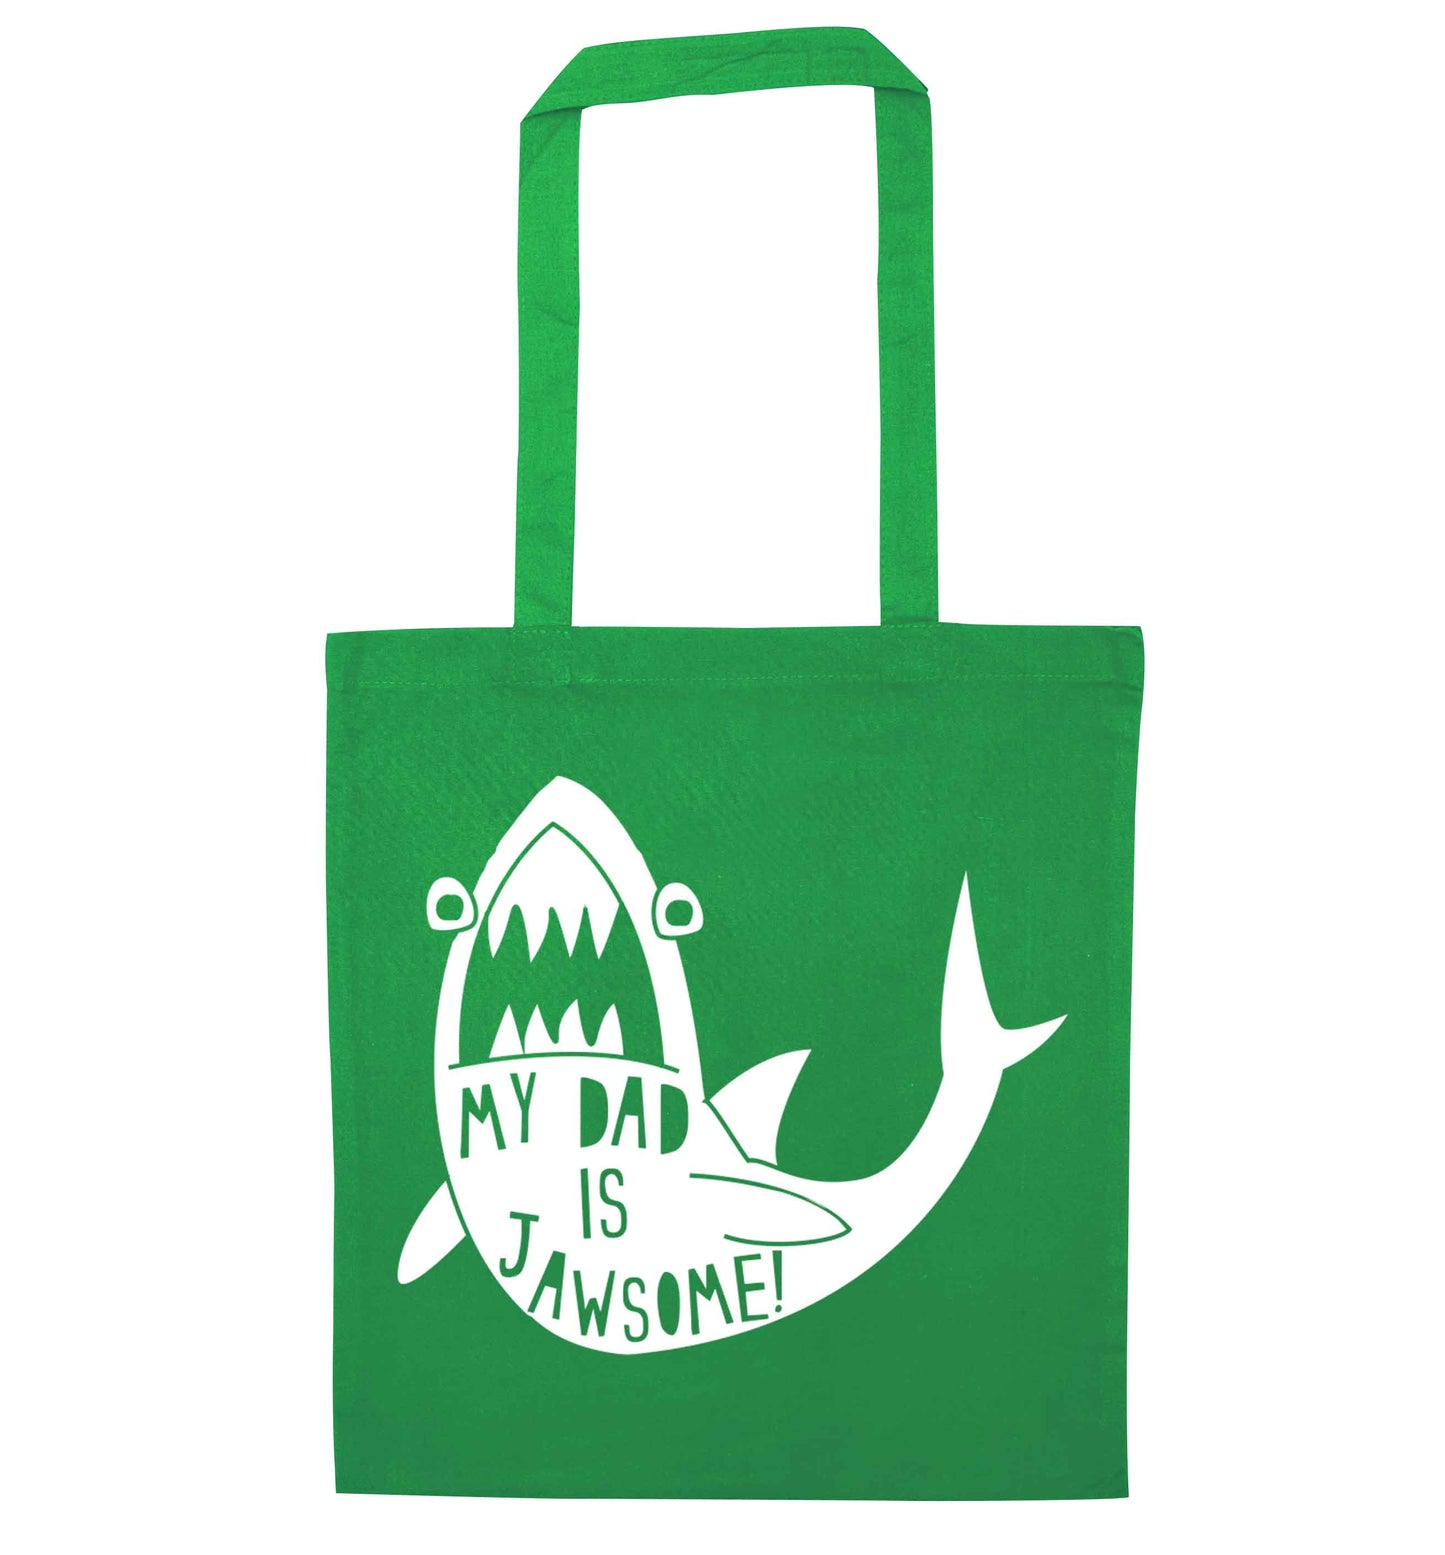 My Dad is jawsome green tote bag